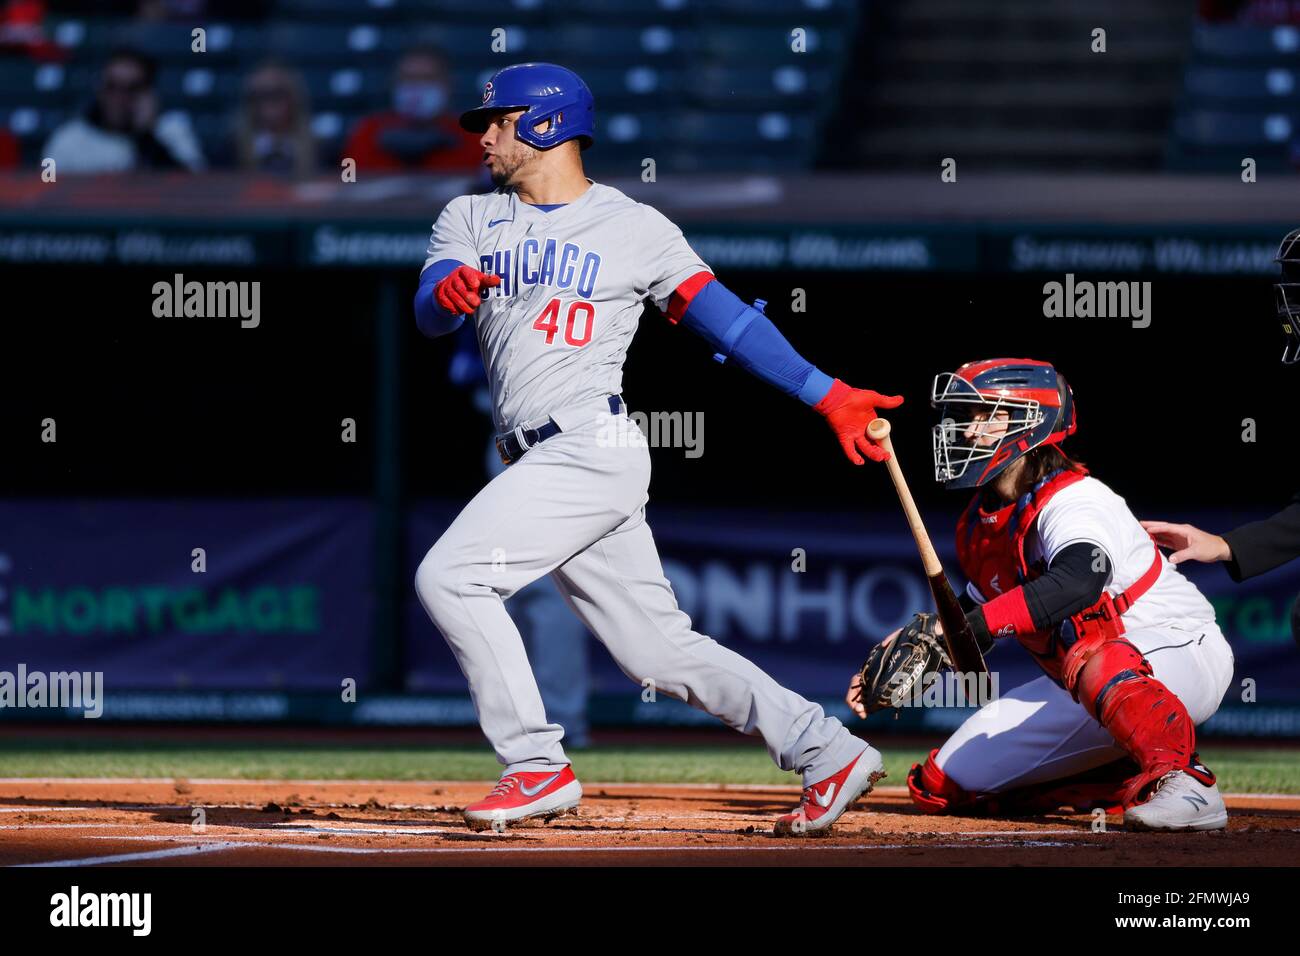 CLEVELAND, OH - MAY 11: Willson Contreras (40) of the Chicago Cubs singles to centerfield to drive in a run in the second inning of a game against the Stock Photo